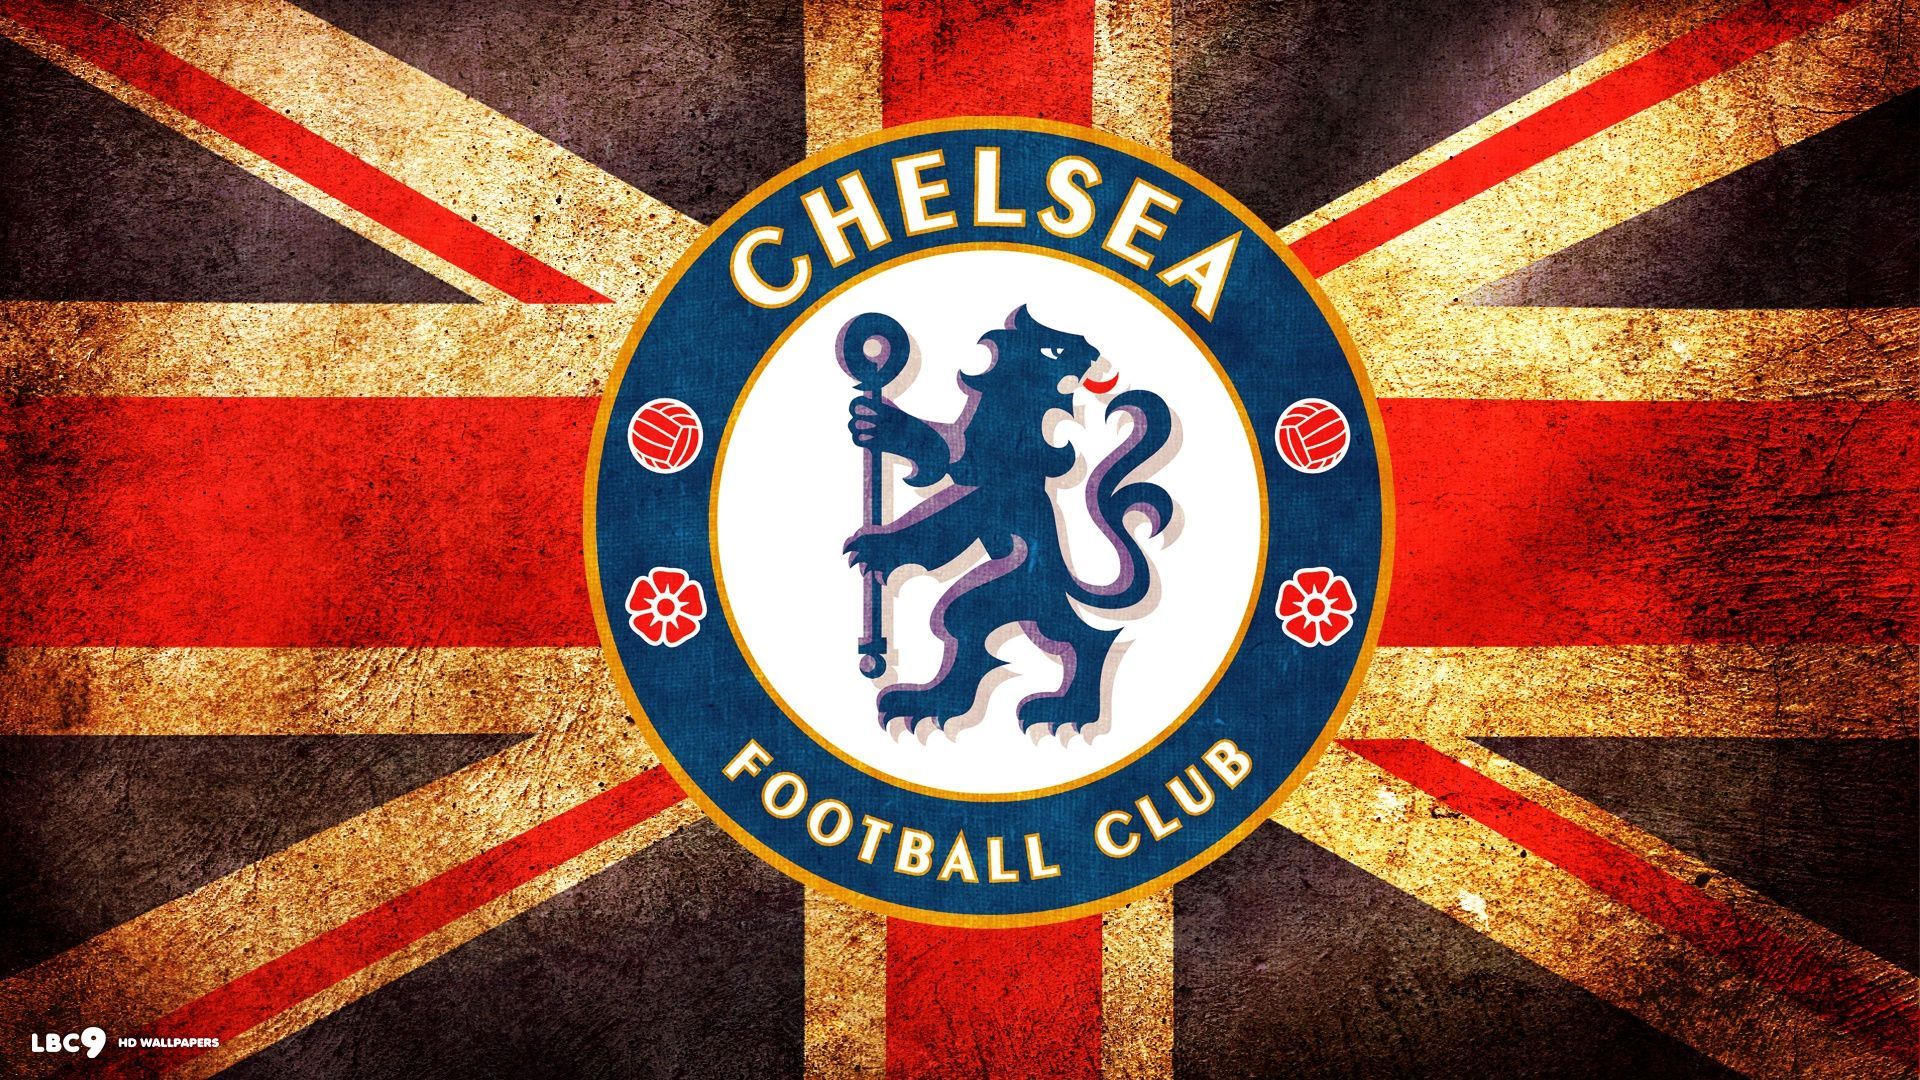 Chelsea wallpaper 1 / 28 clubs hd backgrounds